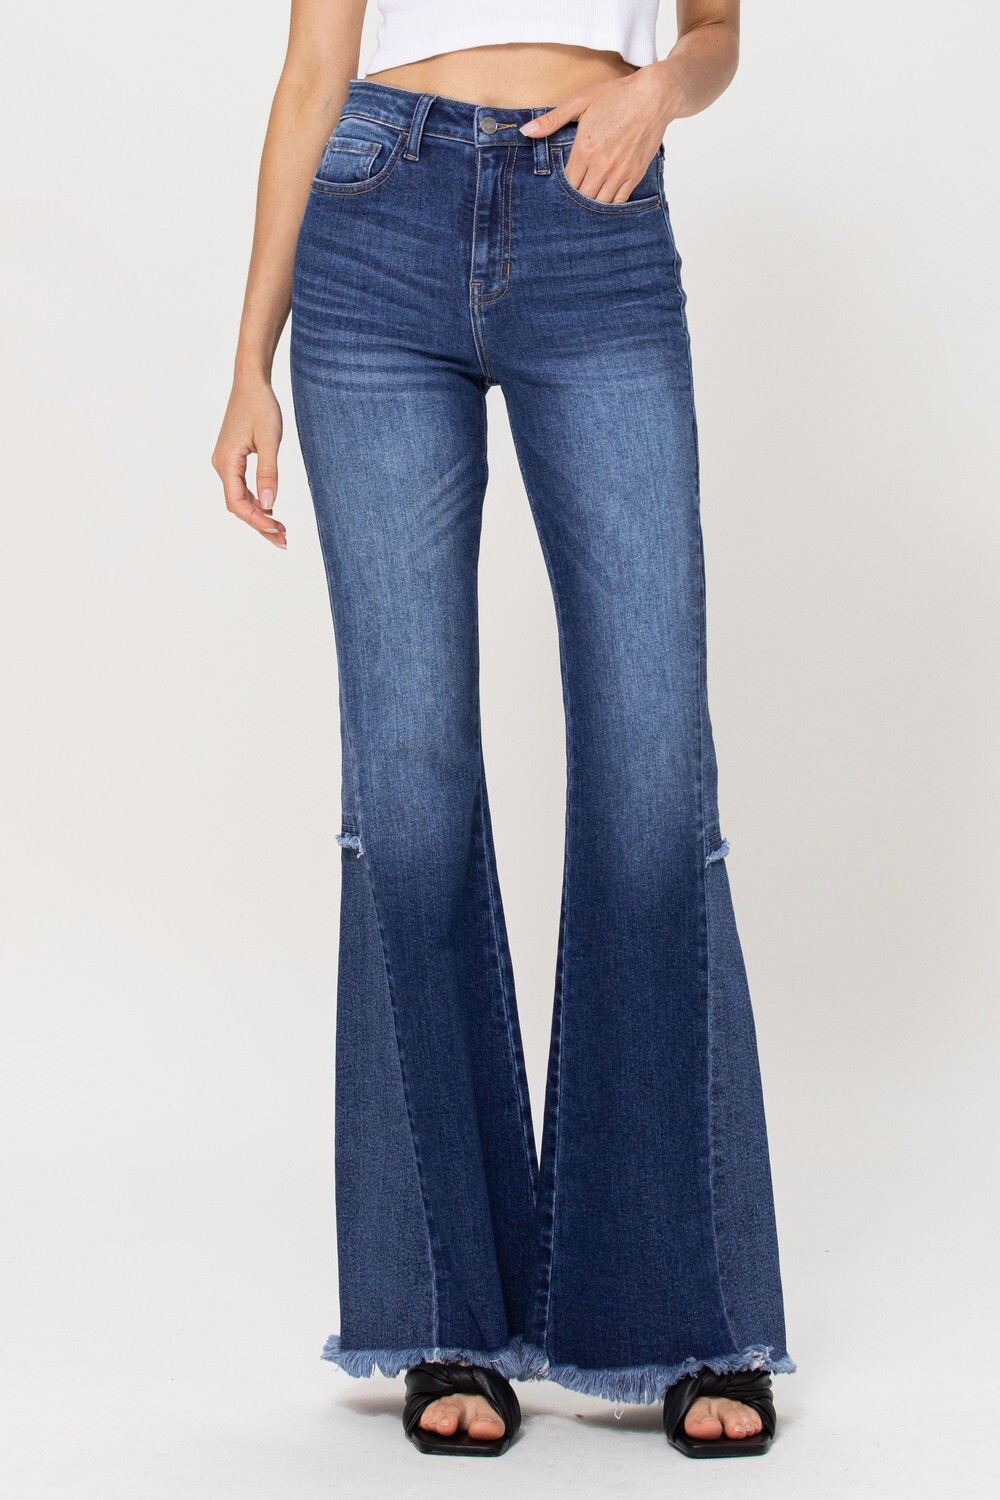 AAC - The Panel Voted Yes! - High Rise Denim Jeans